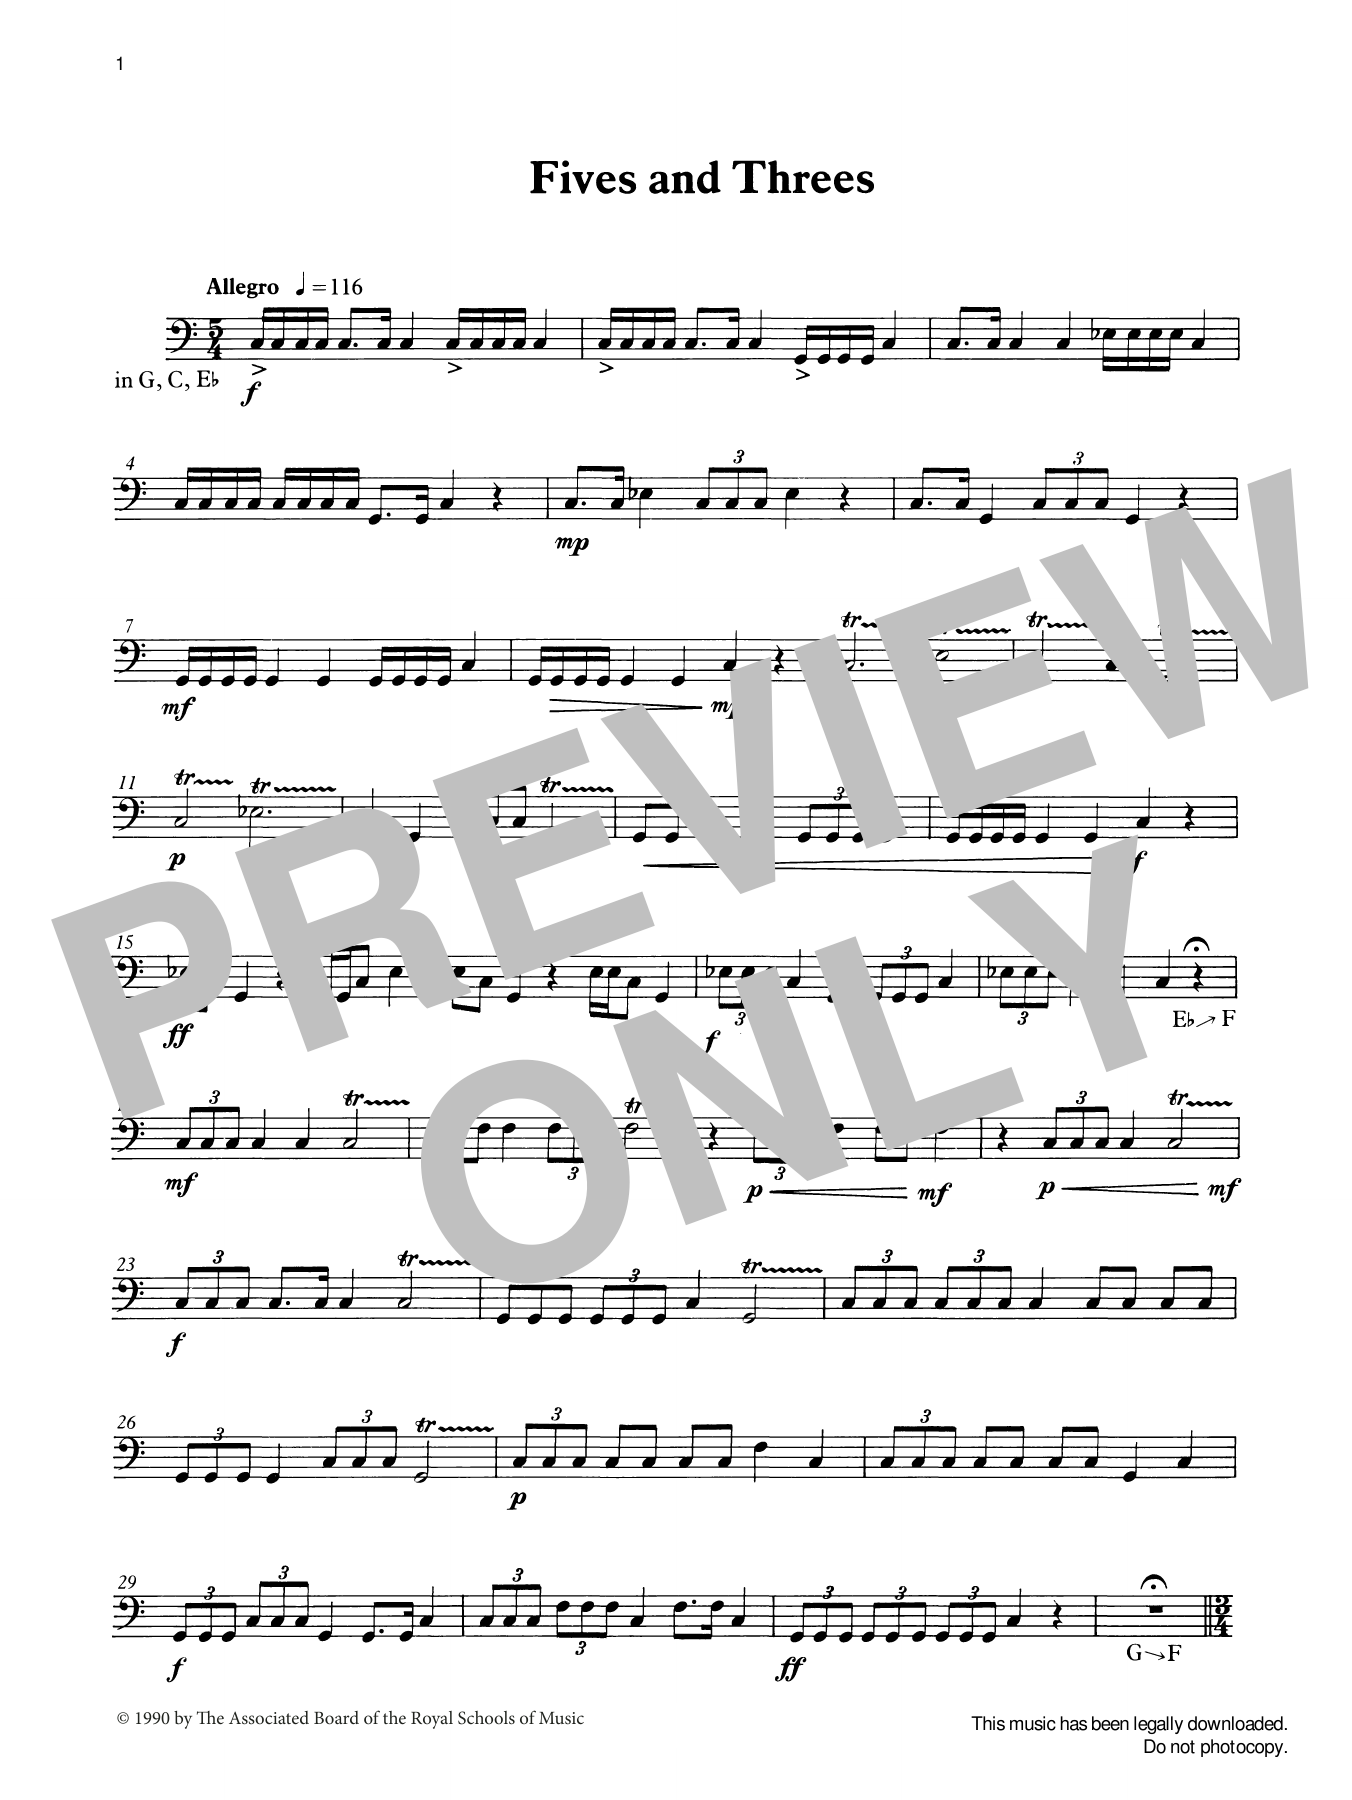 Download Ian Wright Fives and Threes from Graded Music for Sheet Music